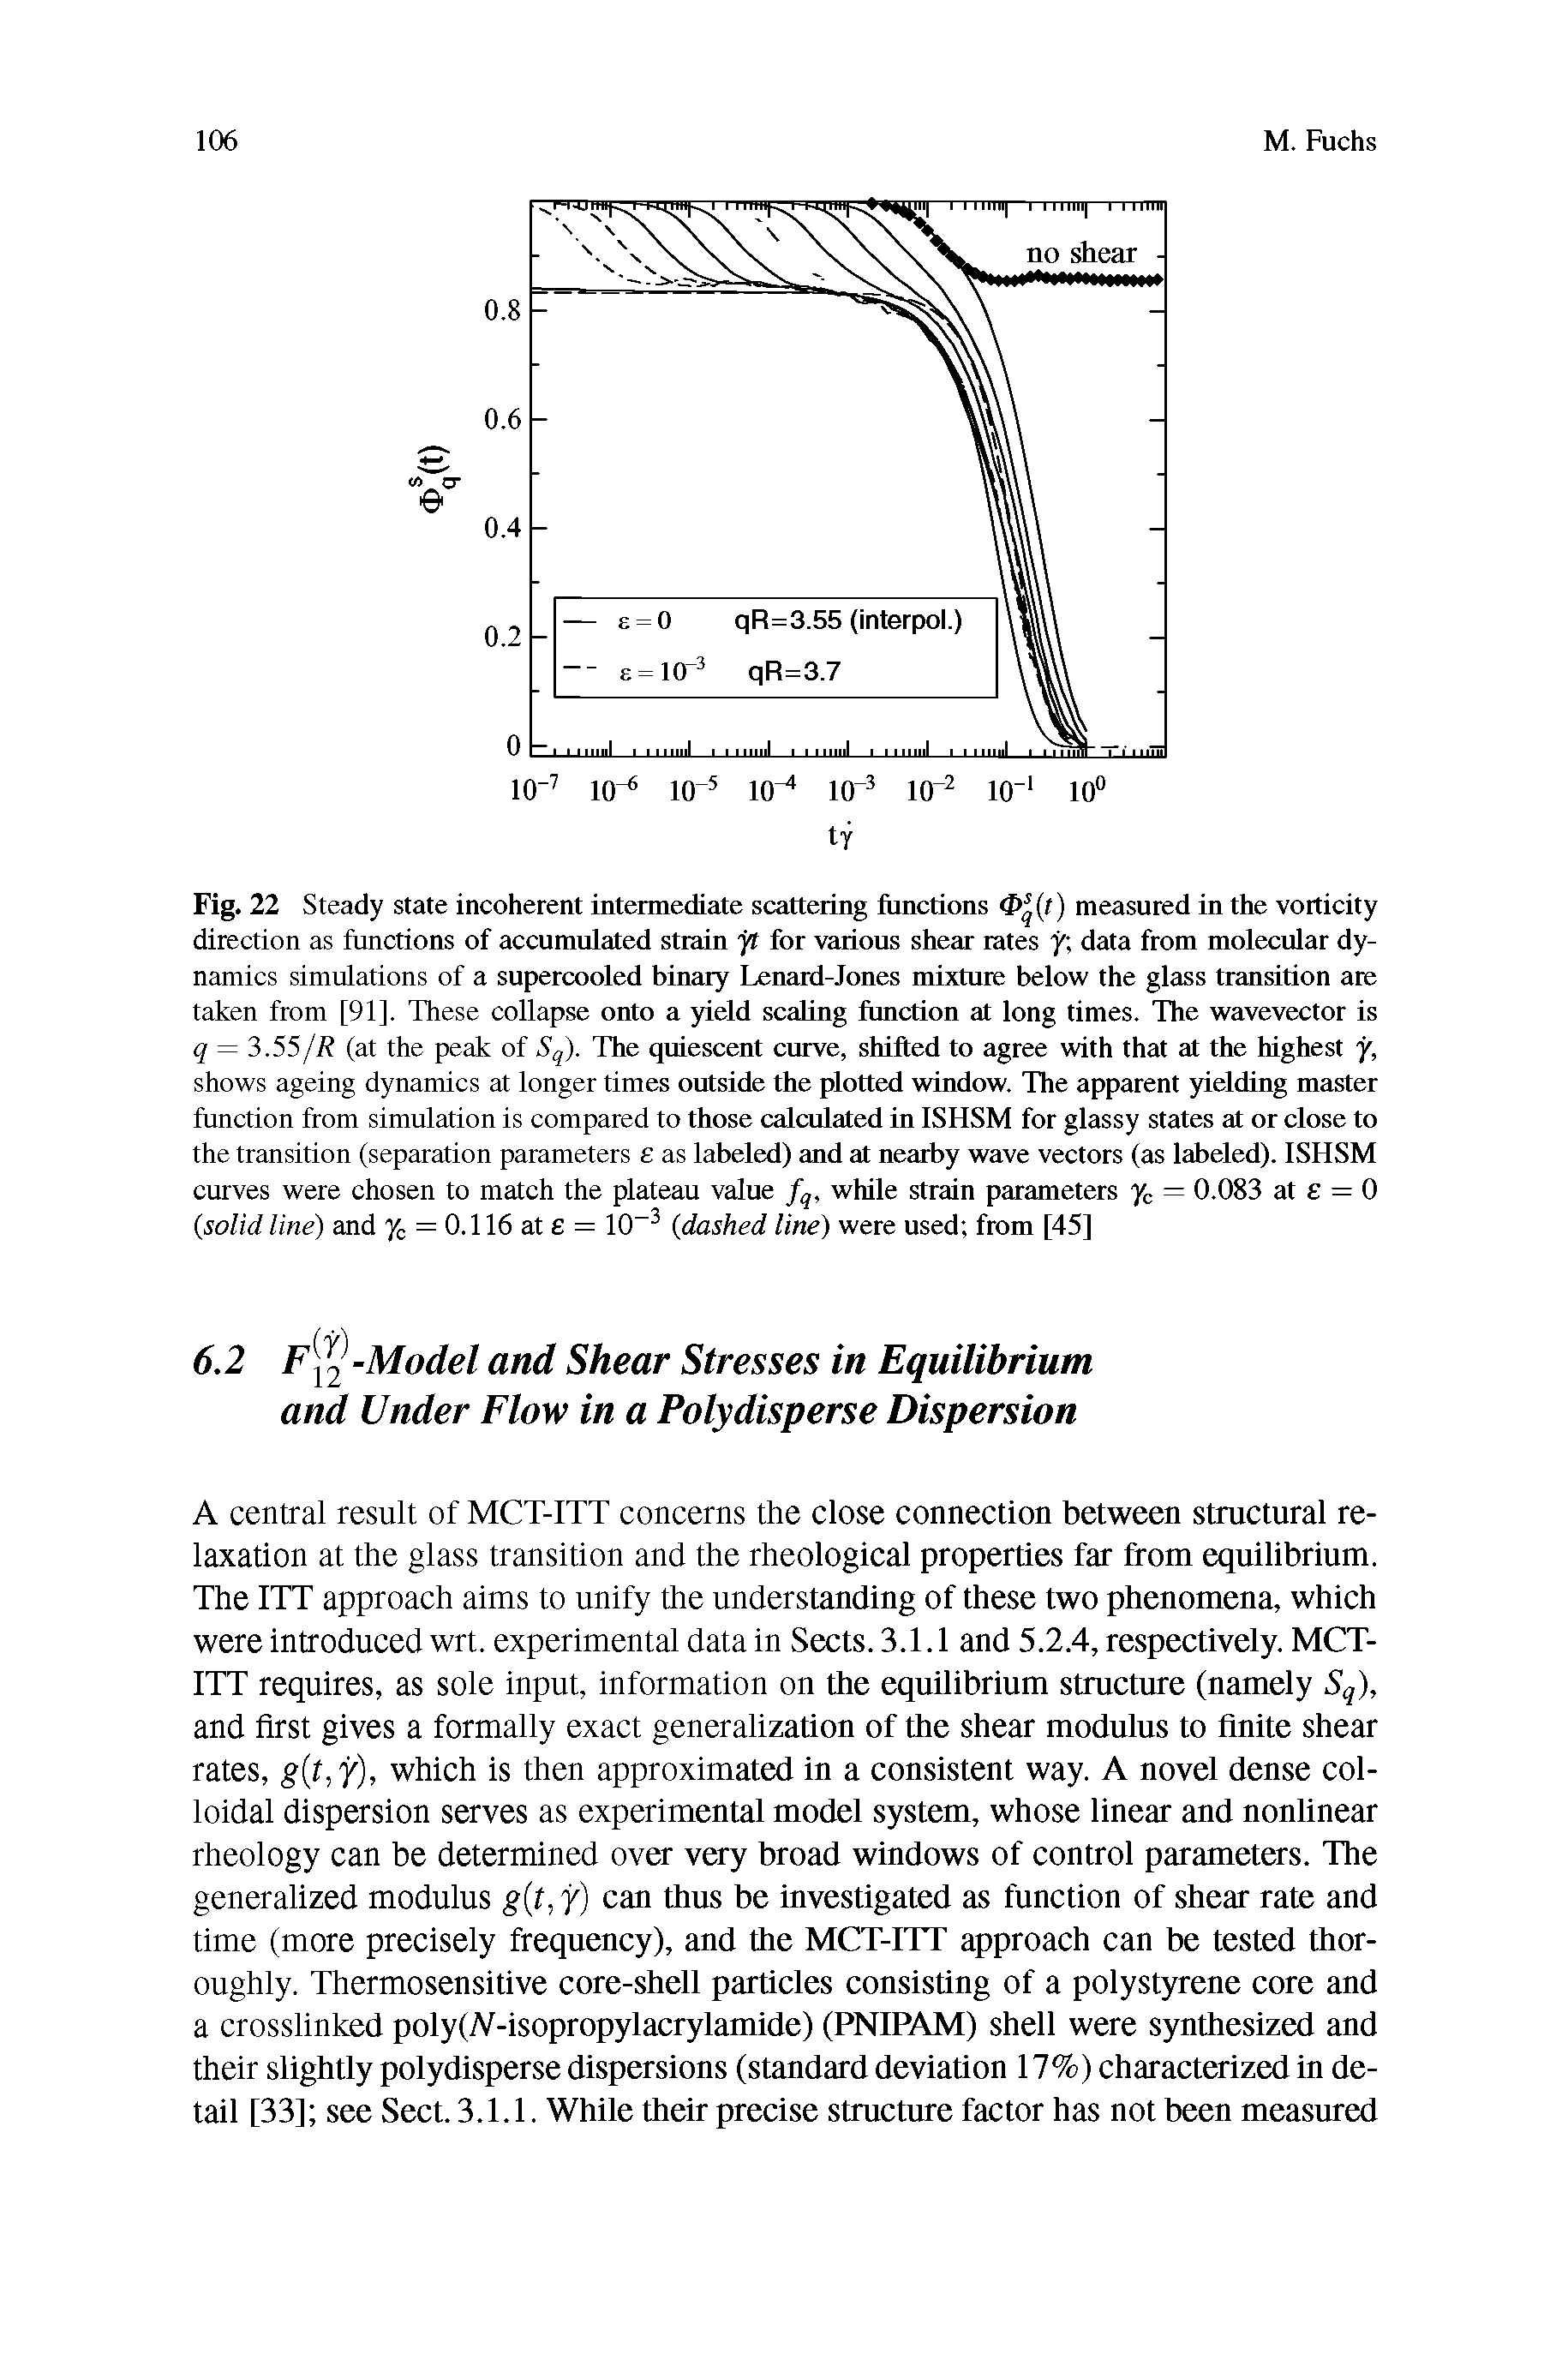 Fig. 22 Steady state incoherent intermediate scattering functions (z) measured in the vorticity direction as functions of accumulated strain jf for various shear rates y data from molecular dynamics simulations of a supercooled binary Lenard-Jones mixture below the glass transition ate taken from [91]. These collapse onto a yield scaling function at long times. The wavevector is q = 3.55/R (at the peak of Sq). The quiescent curve, shifted to agree with that at the highest y, shows ageing dynamics at longer times outside the plotted window. The apparent yielding master function from simulation is compared to those calculated in ISHSM for glassy states at or close to the transition (separation parameters s as labeled) and at nearby wave vectors (as labeled). ISHSM curves were chosen to match the plateau value fq, while strain parameters yc = 0.083 at = 0 solid line) and y, = 0.116 at e = 10 dashed line) were used from [45]...